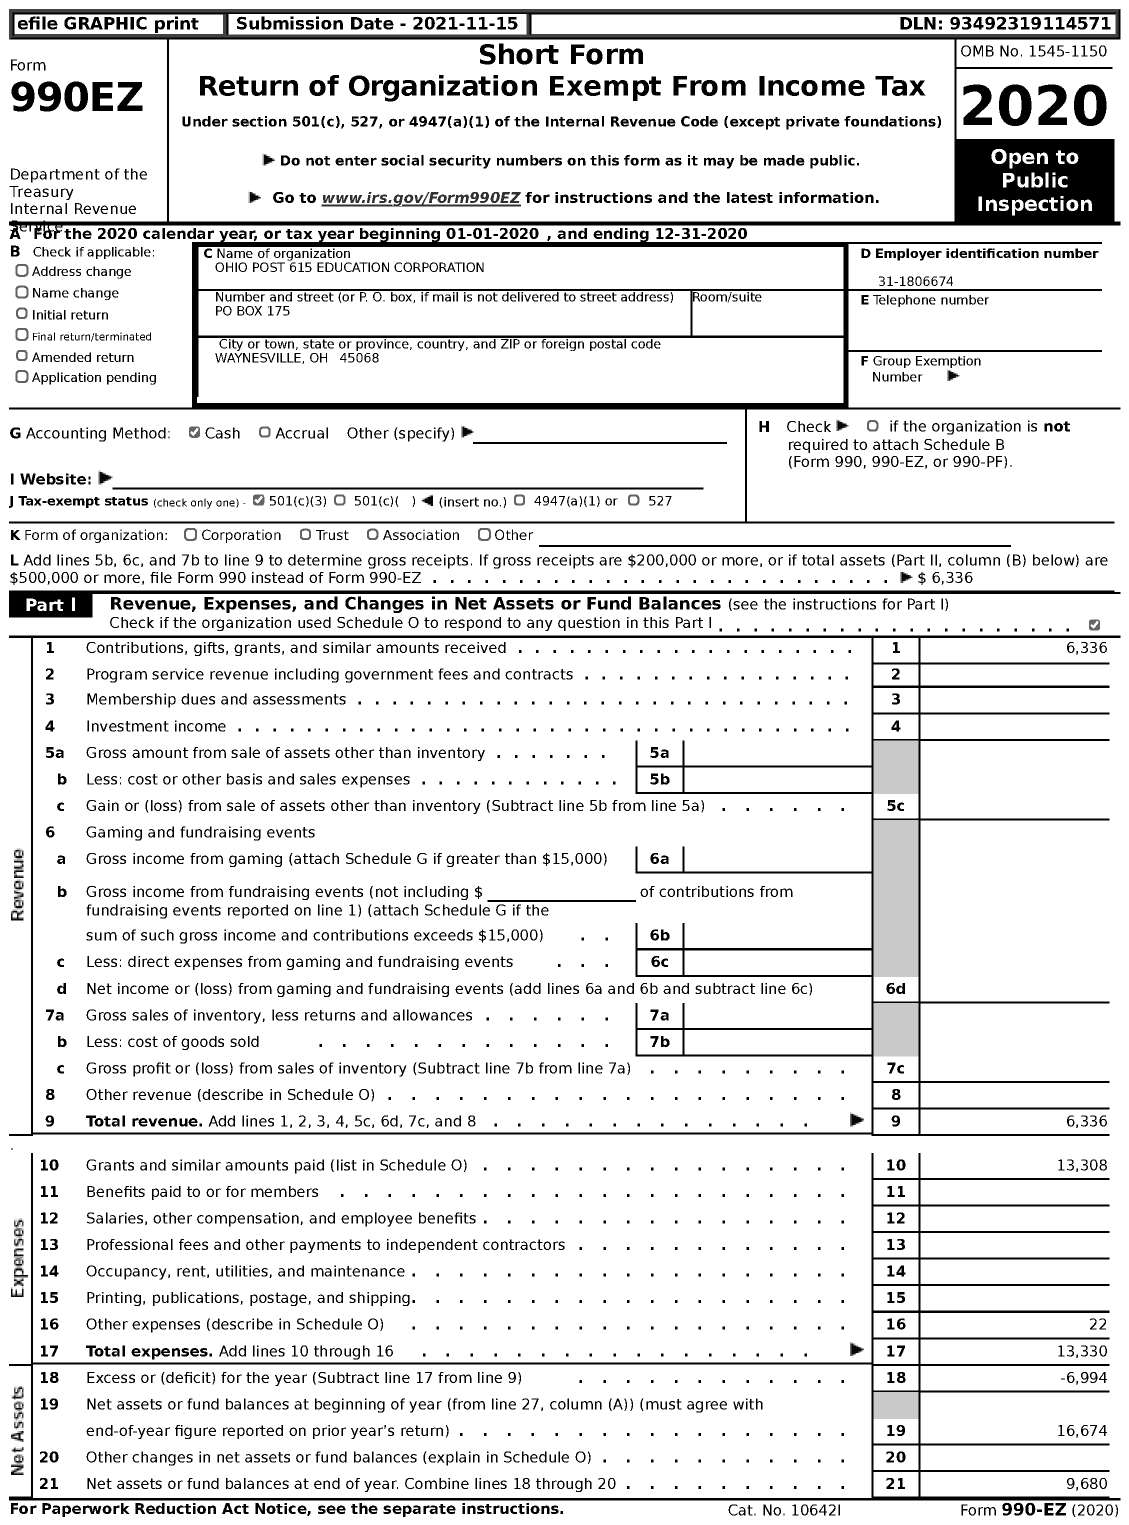 Image of first page of 2020 Form 990EZ for Ohio Post 615 Education Corporation